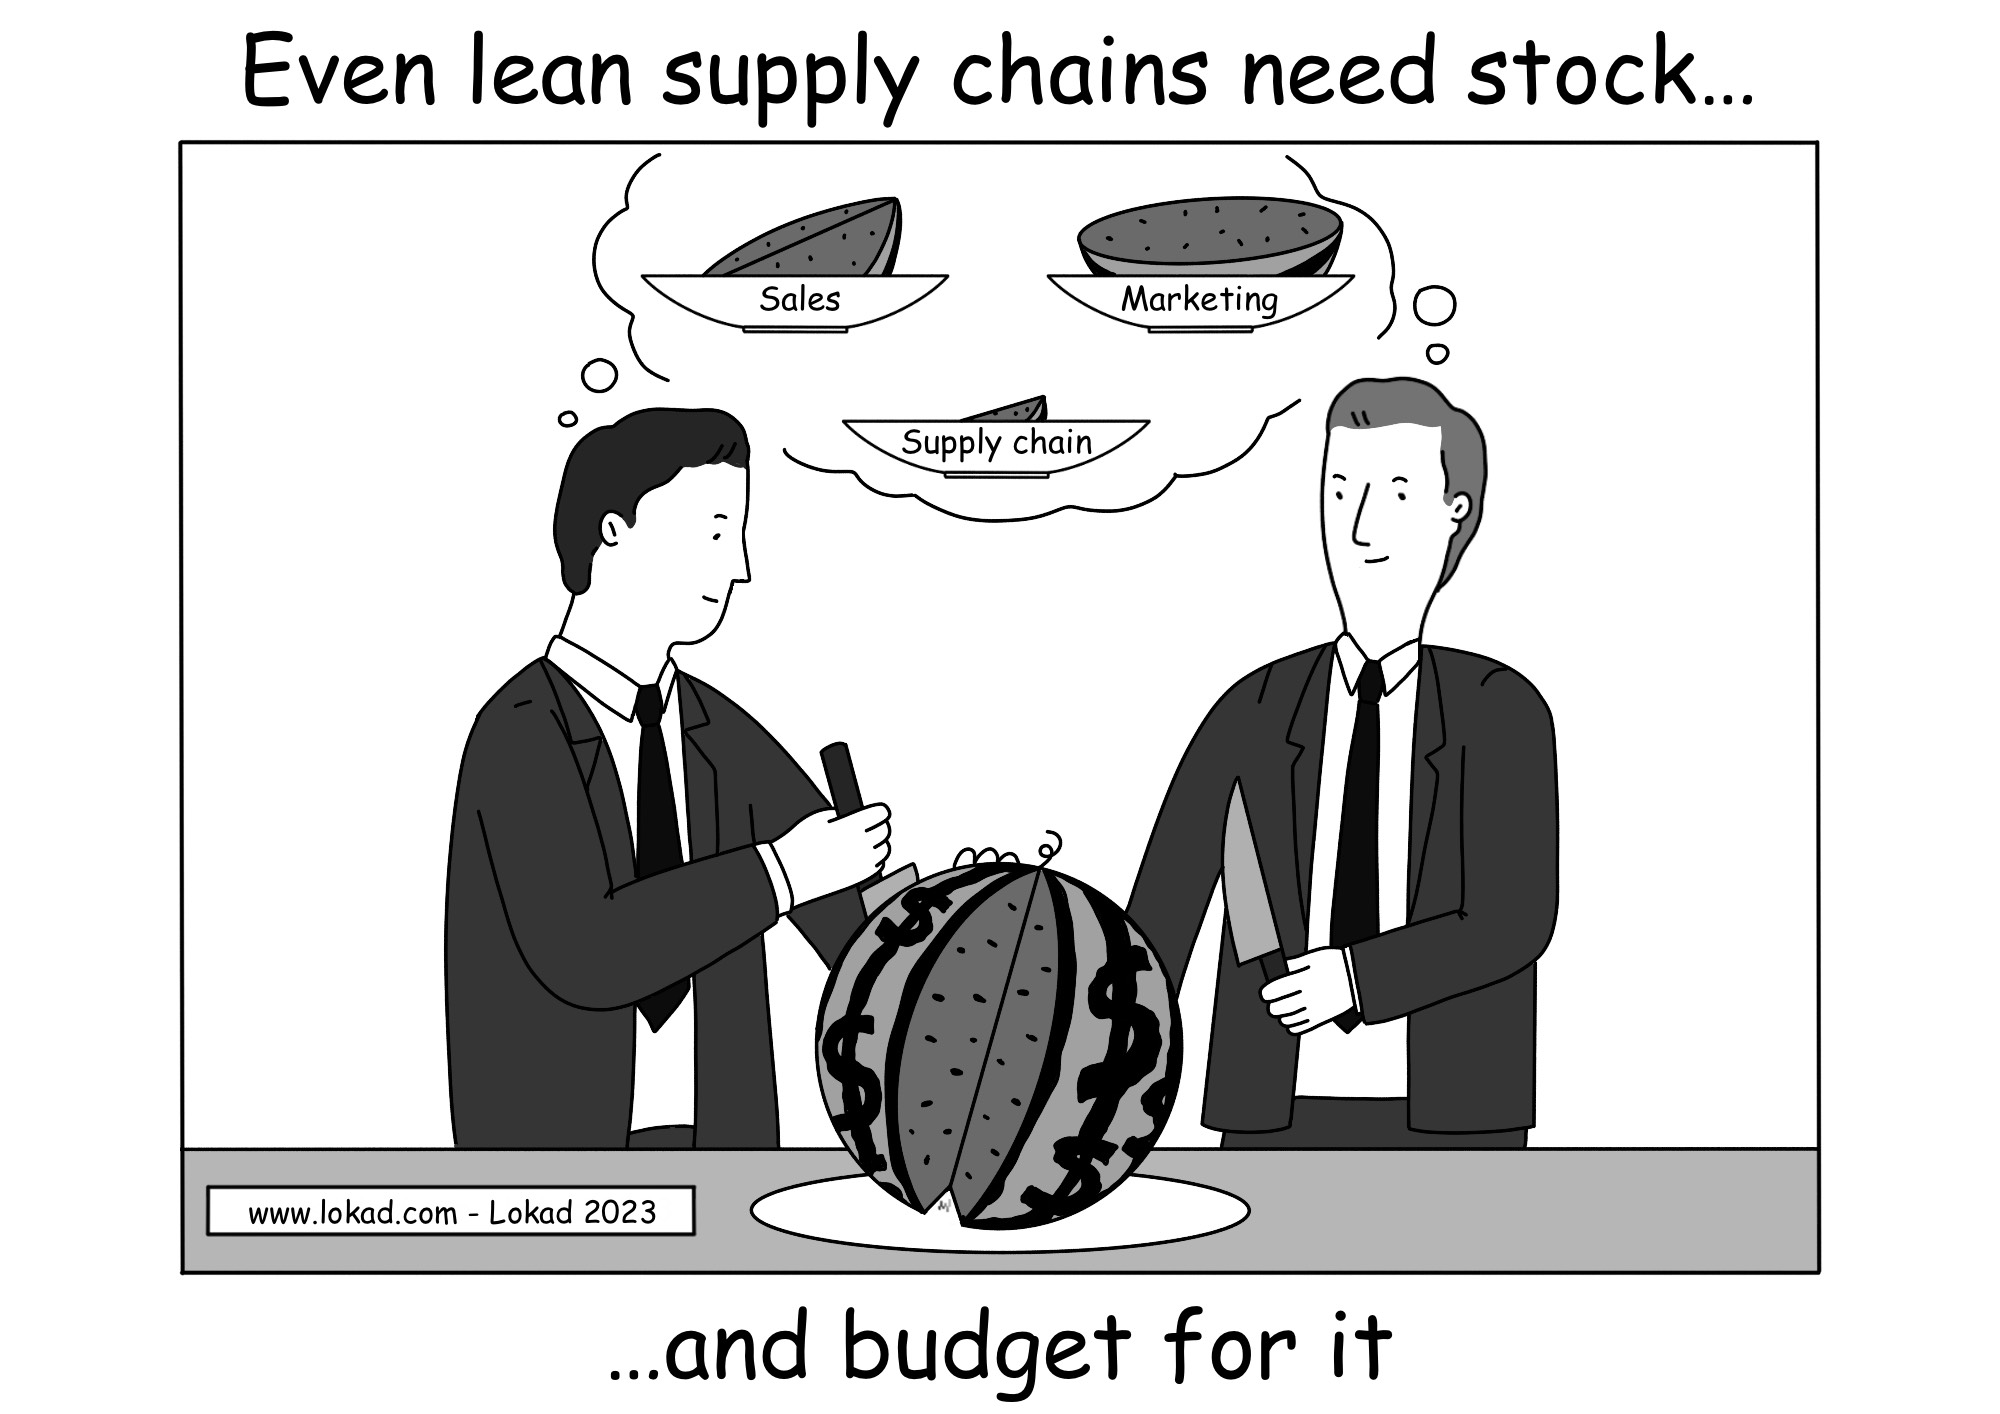 Even lean supply chains need stock